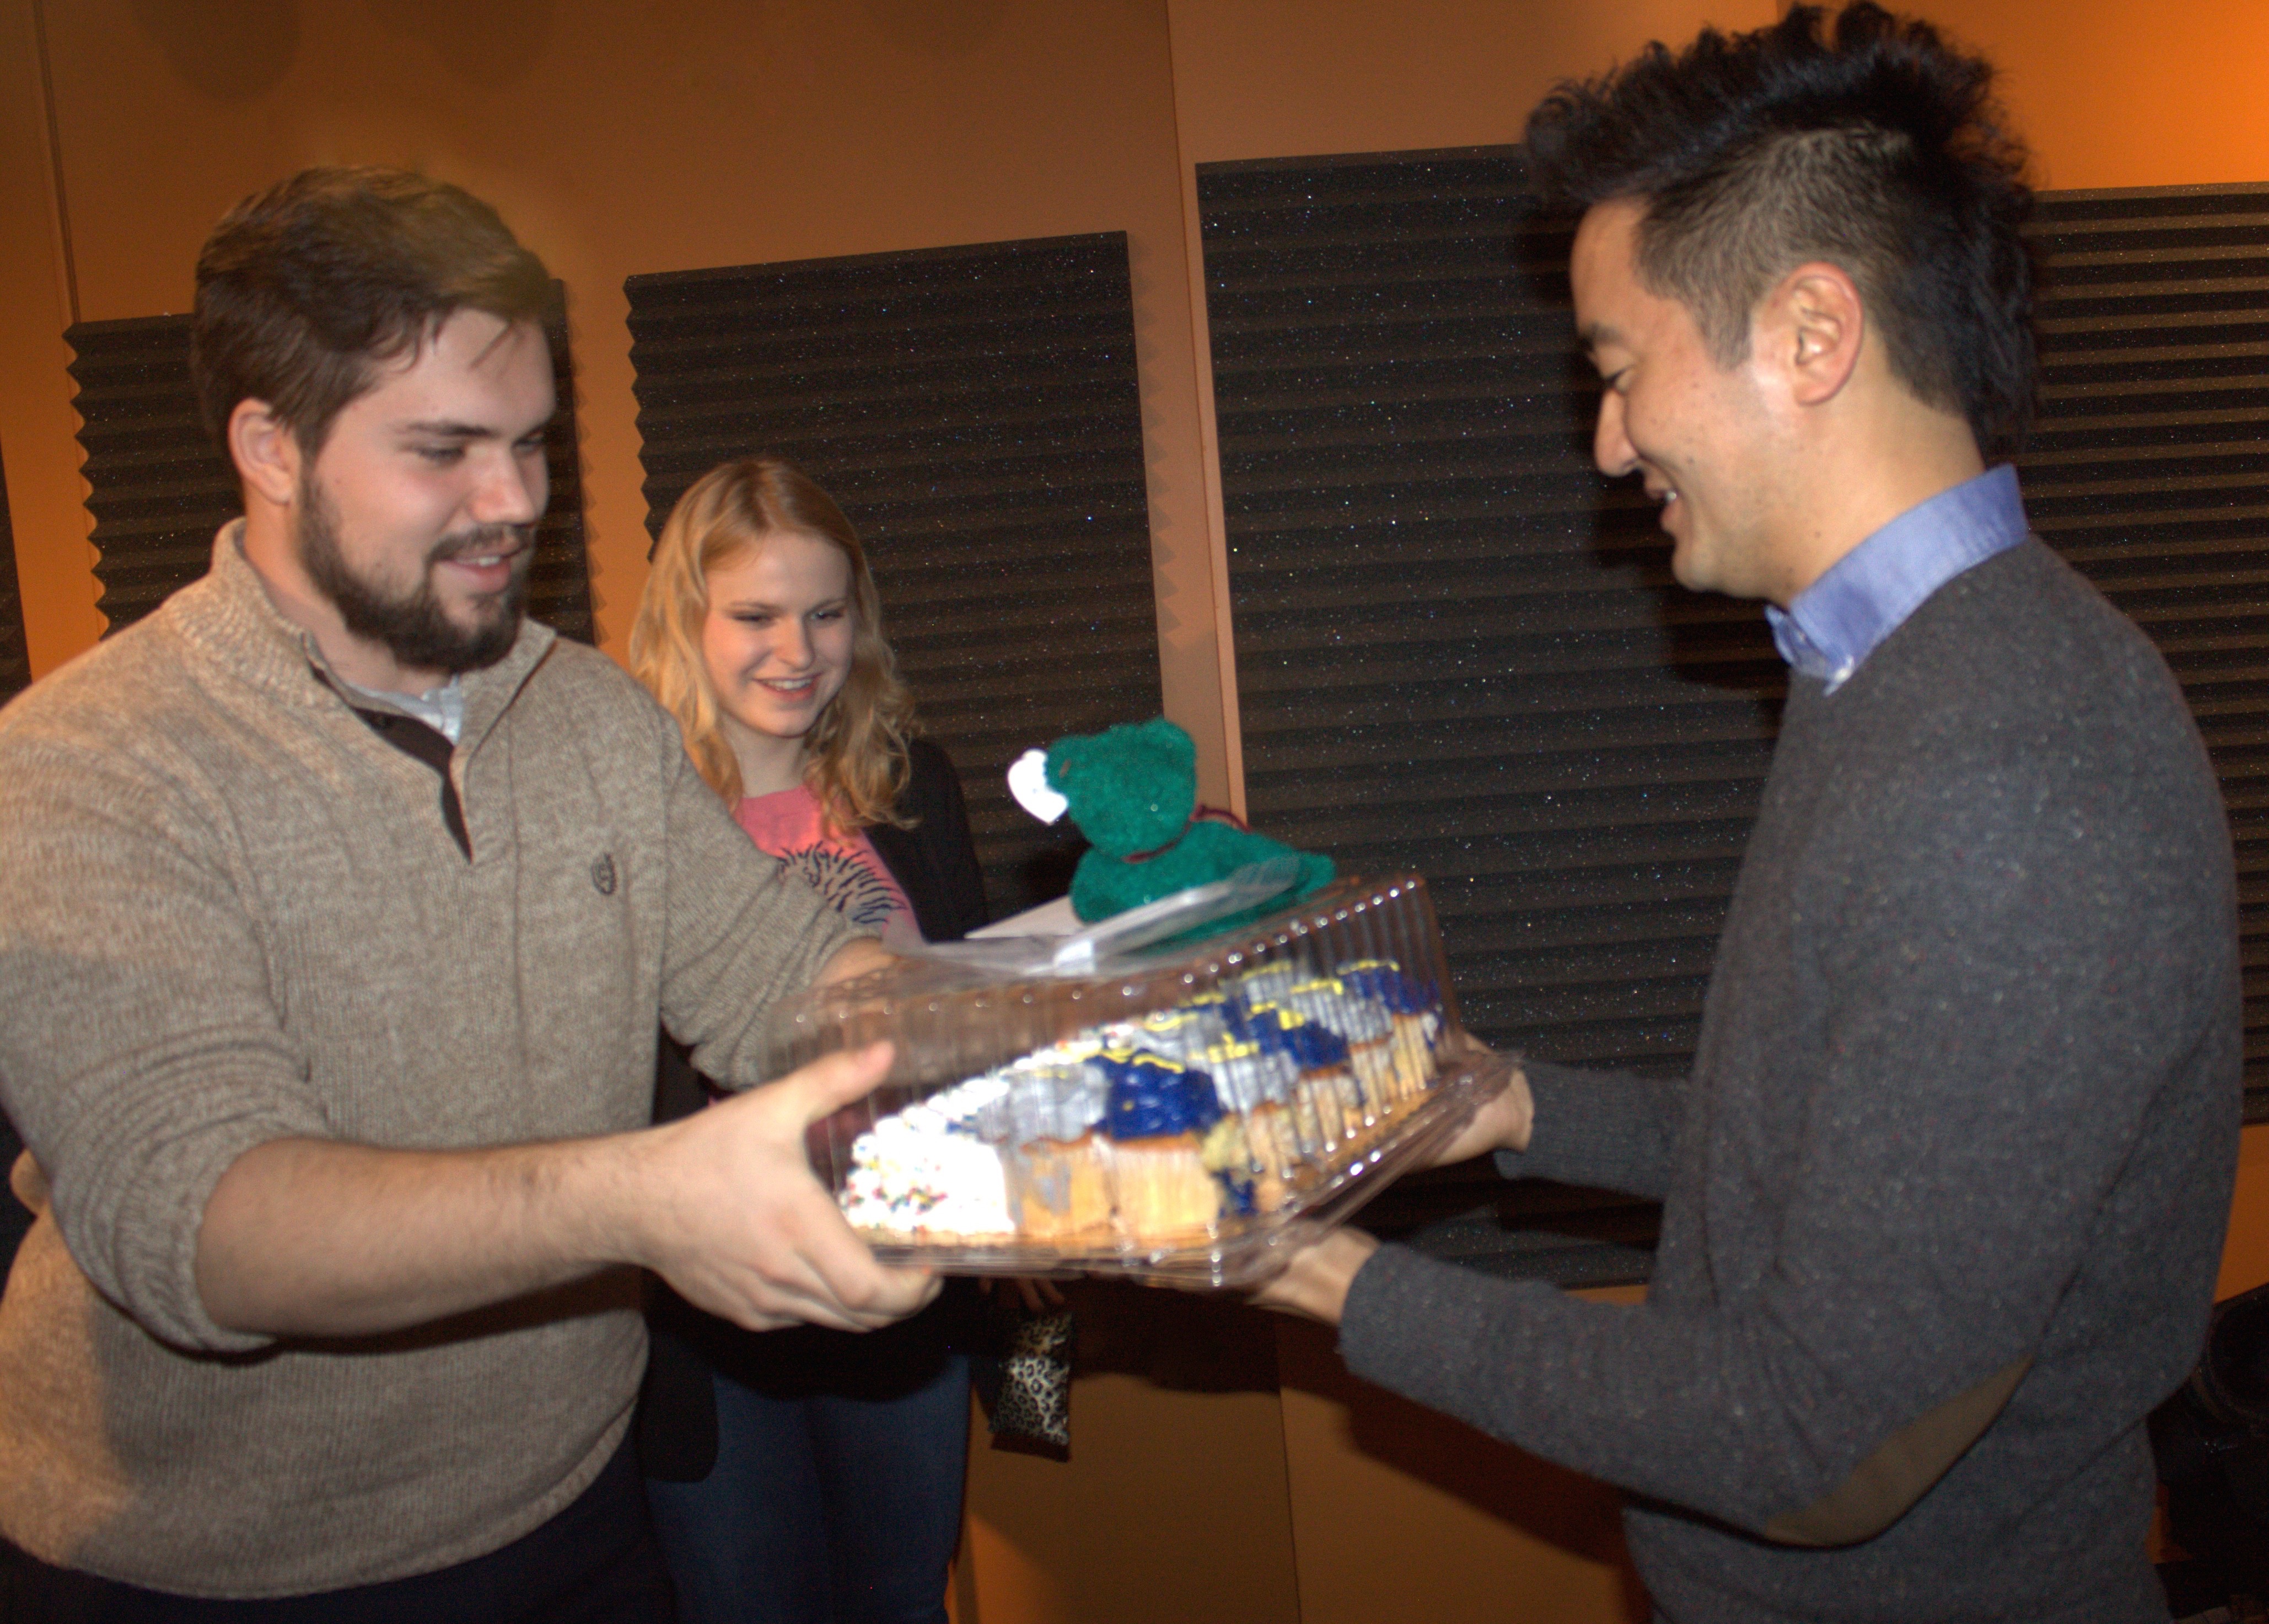 Host Will Doran hands over some Kishi Bashi themed cupcakes. Fortunately he claimed to be on a diet, so WRVU still got to eat them.